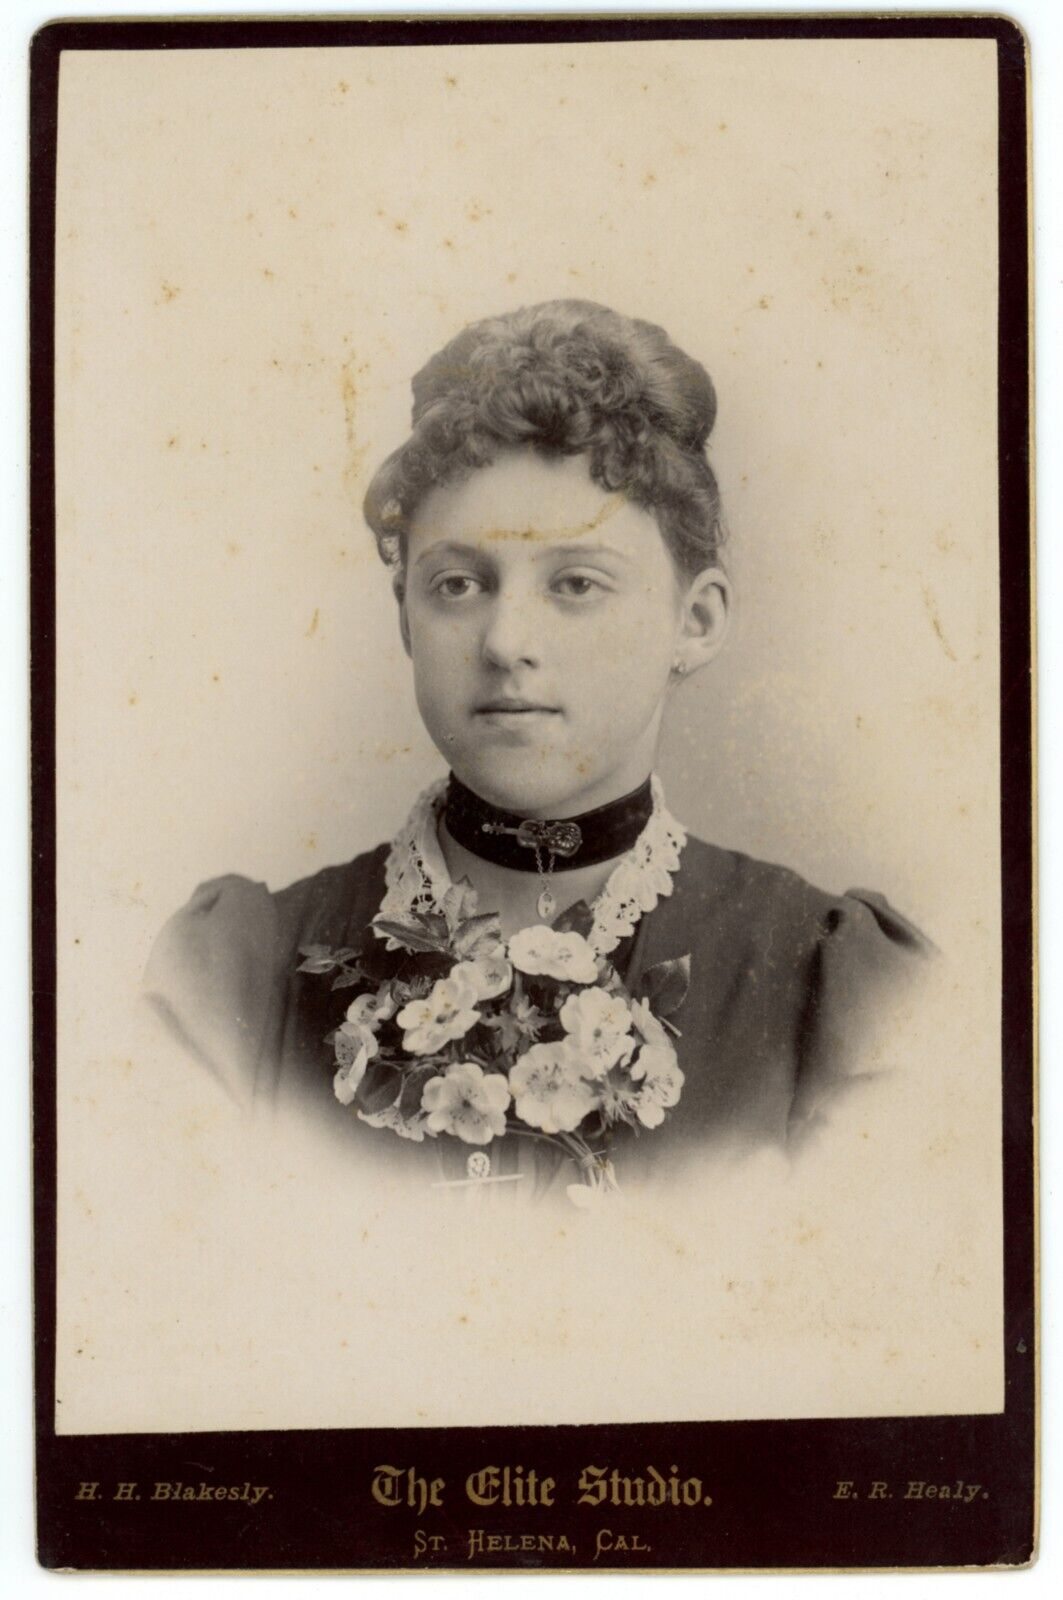 CIRCA 1890'S CABINET CARD Beautiful Young Girl Choker HH Blakesly  St. Helena CA